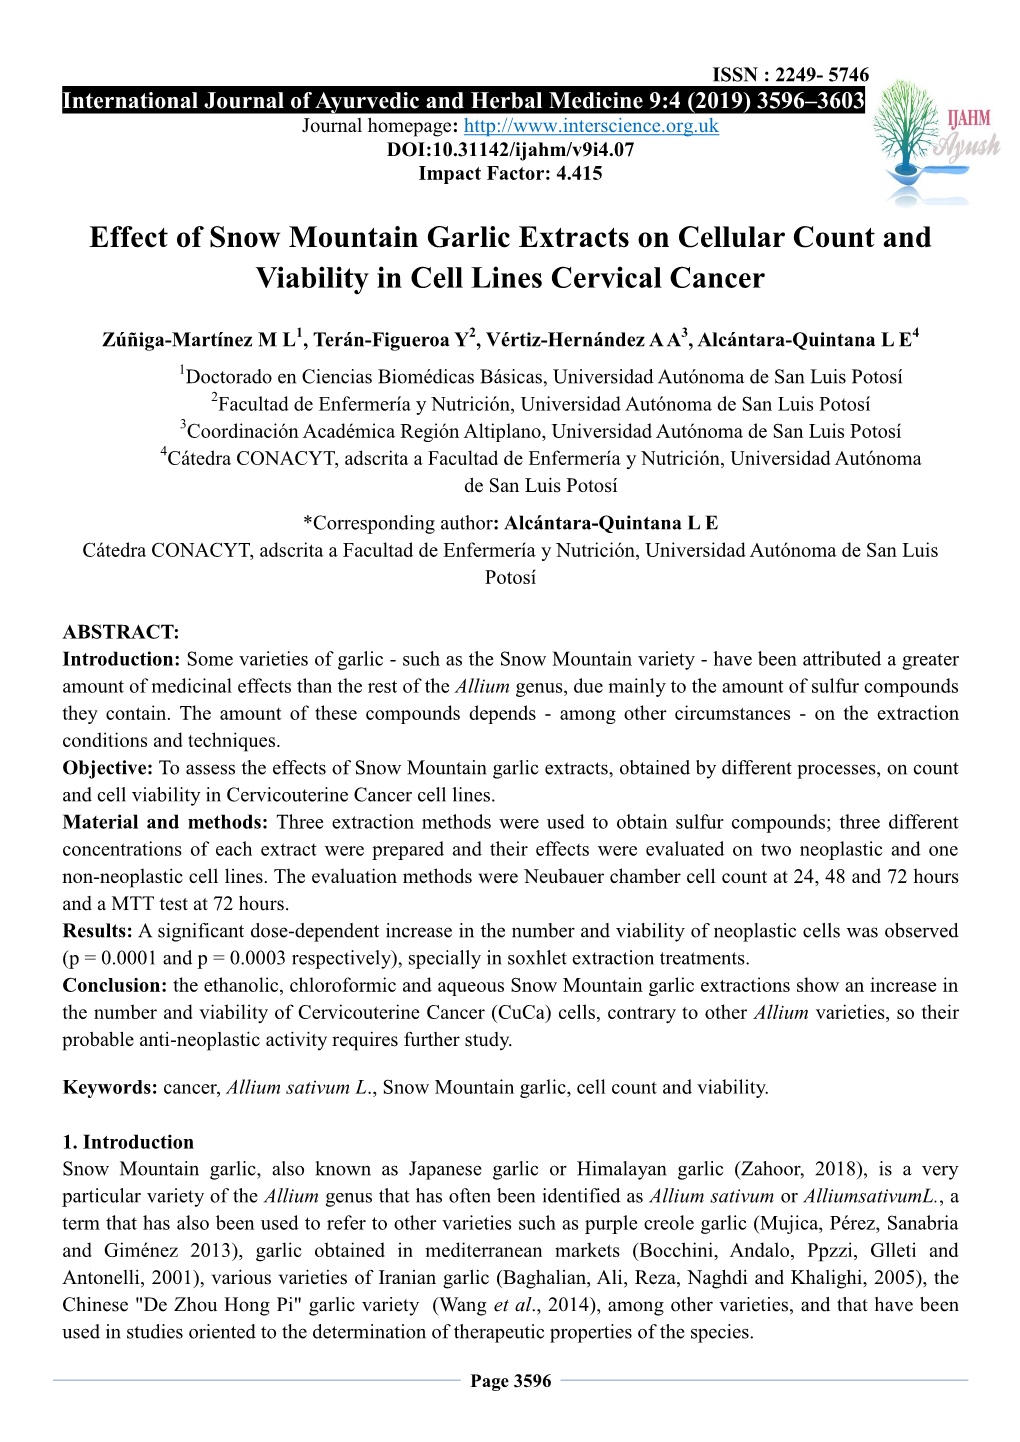 Effect of Snow Mountain Garlic Extracts on Cellular Count and Viability in Cell Lines Cervical Cancer